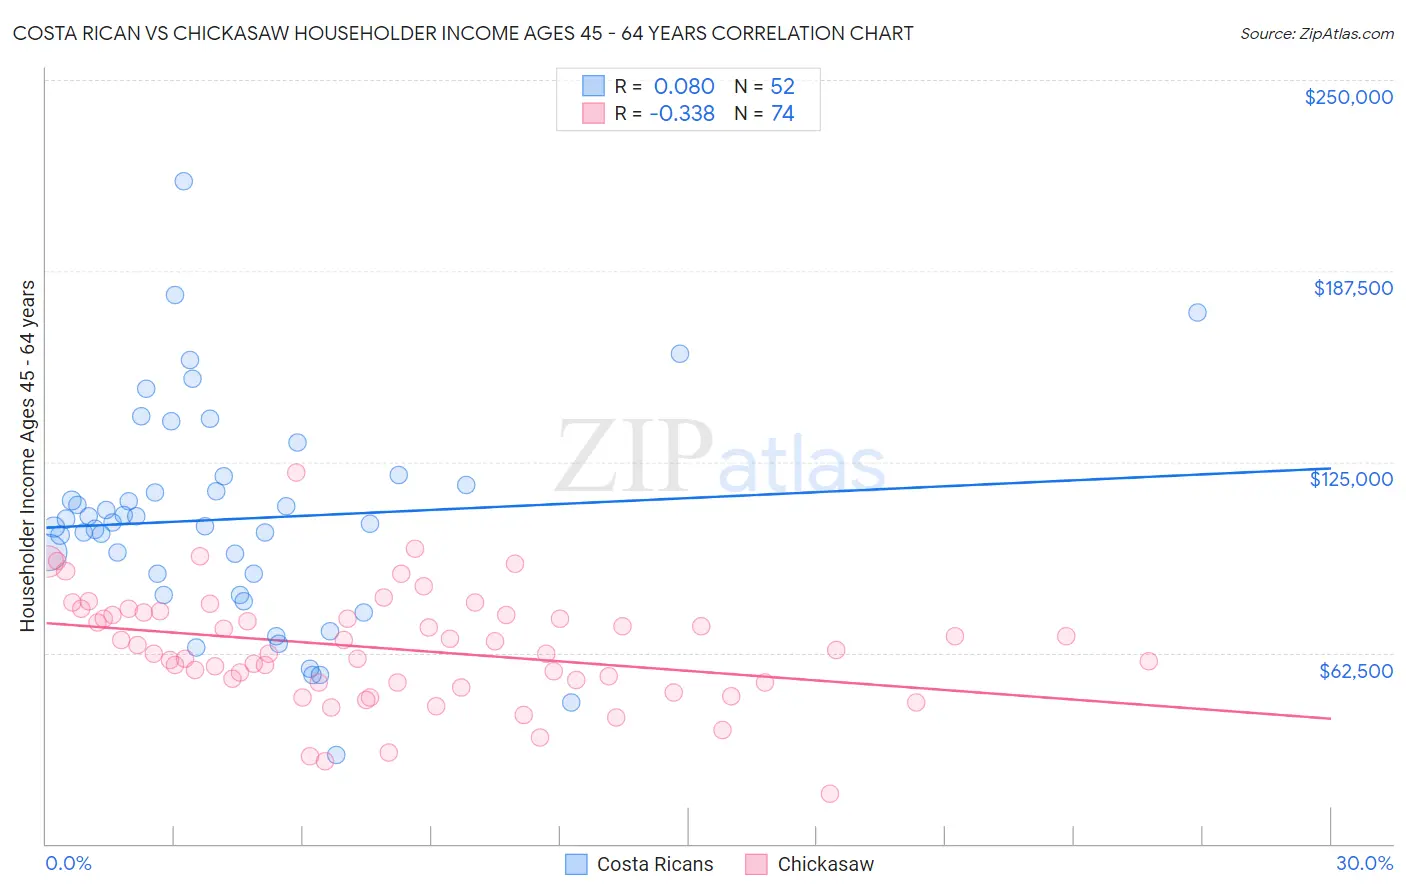 Costa Rican vs Chickasaw Householder Income Ages 45 - 64 years